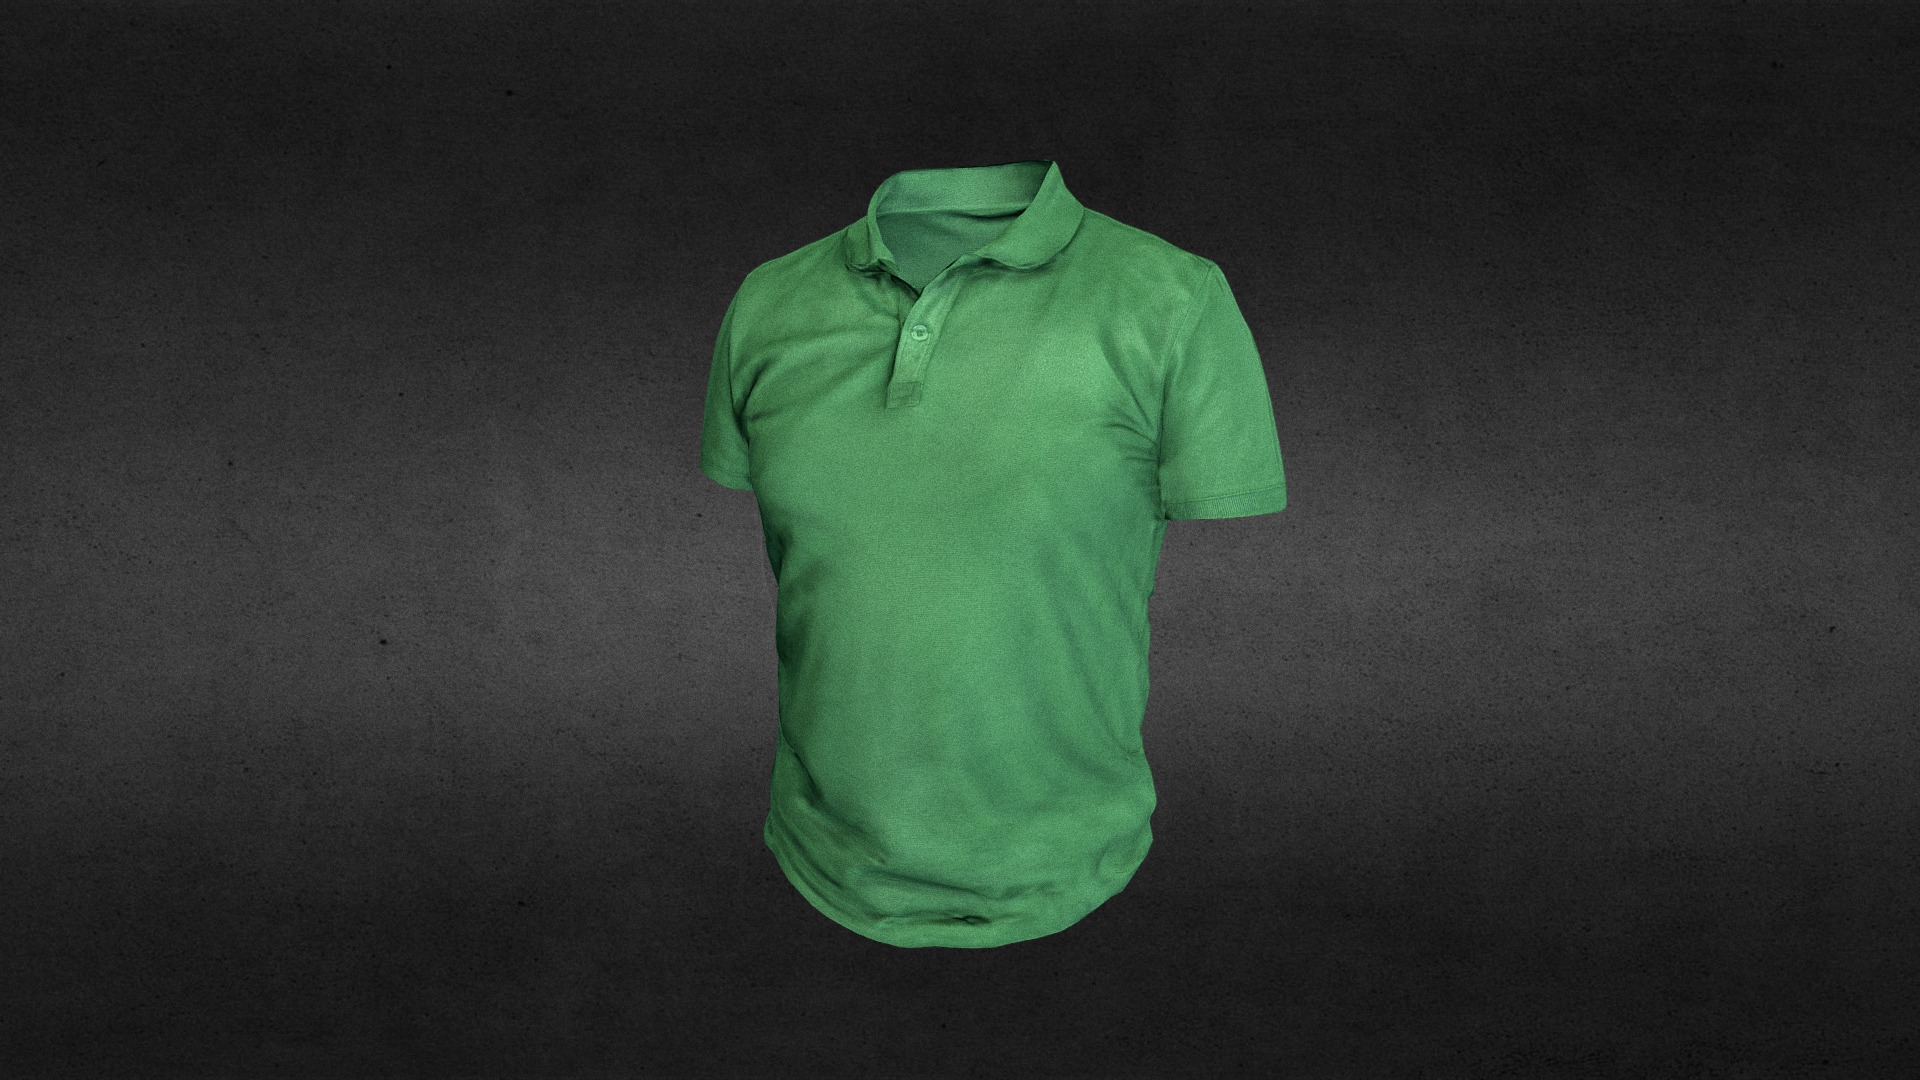 3D model T-shirt - This is a 3D model of the T-shirt. The 3D model is about a green shirt on a black surface.